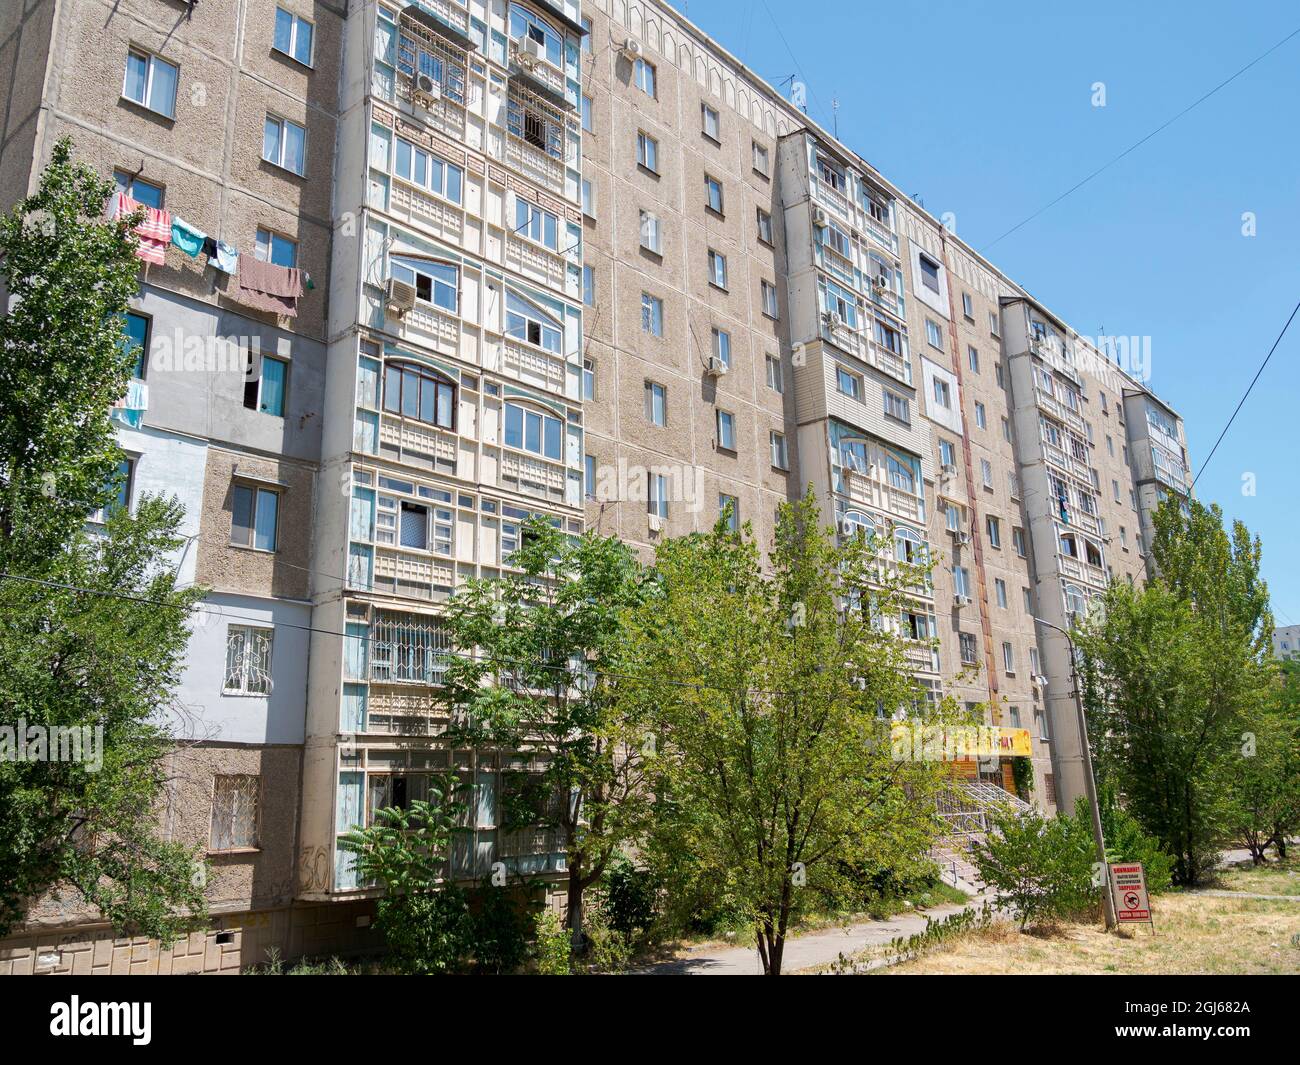 Typical living quarter built during the Soviet Union (Rayon). The capital Bishkek, Kyrgyzstan. (Editorial Use Only) Stock Photo